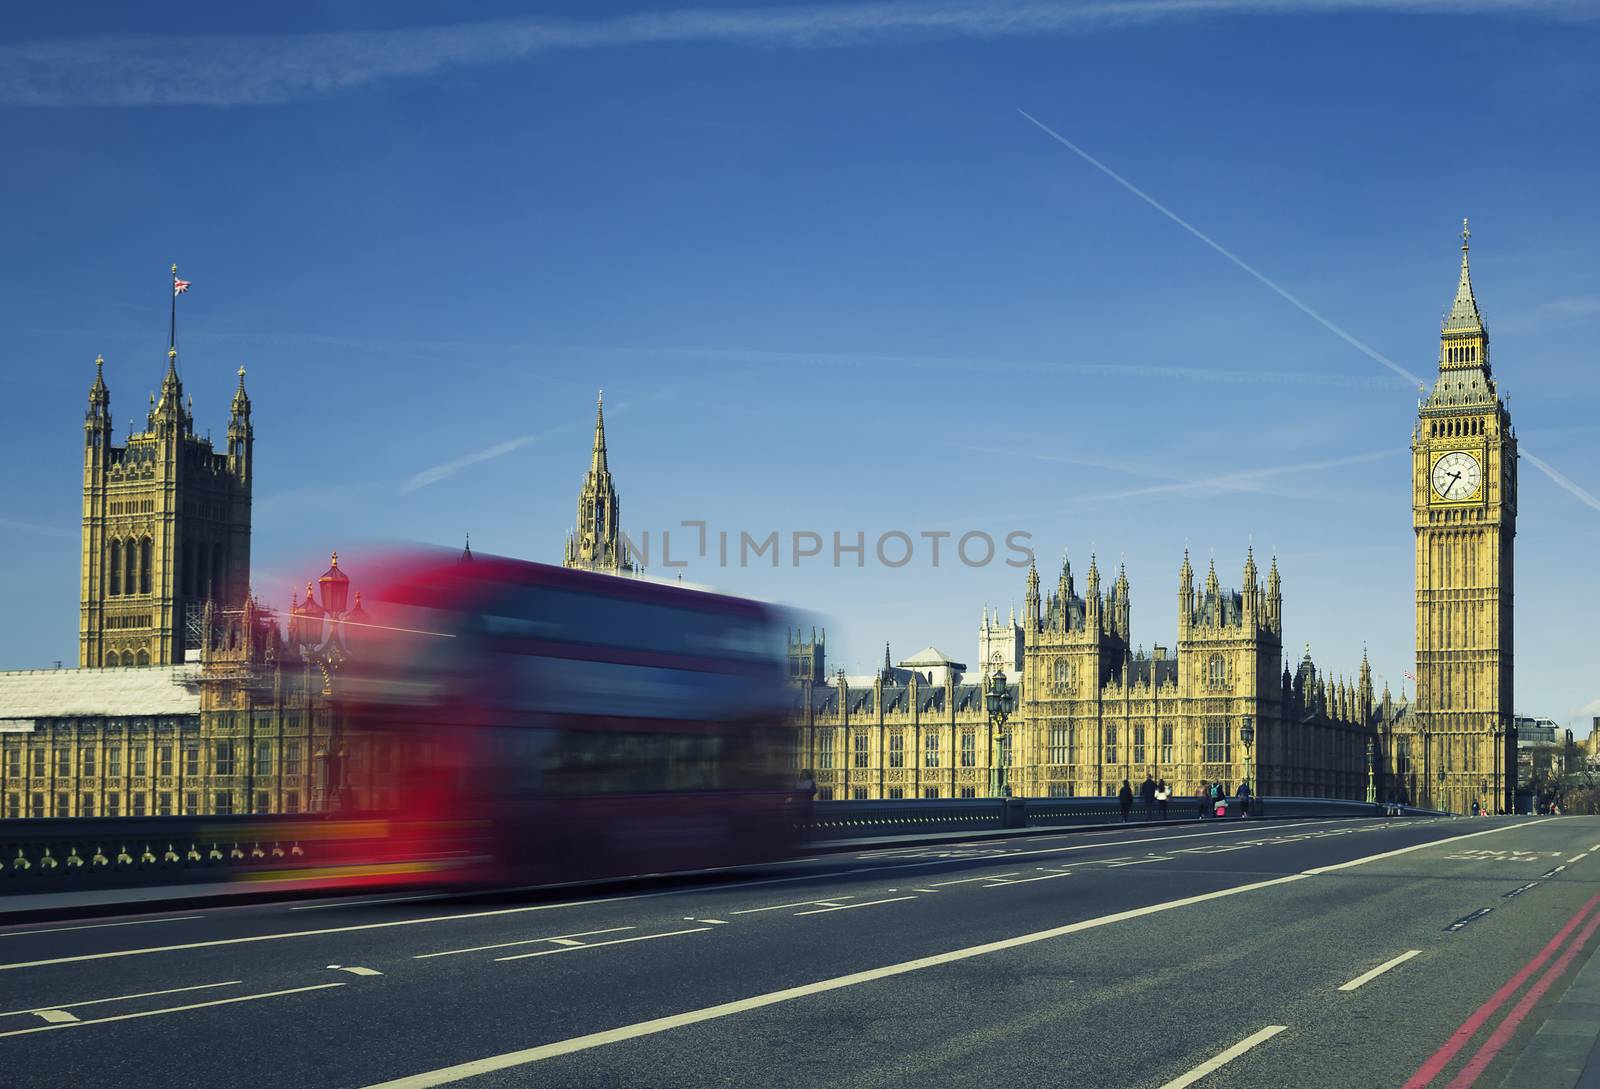 Ben and bus crossing the bridge by vwalakte